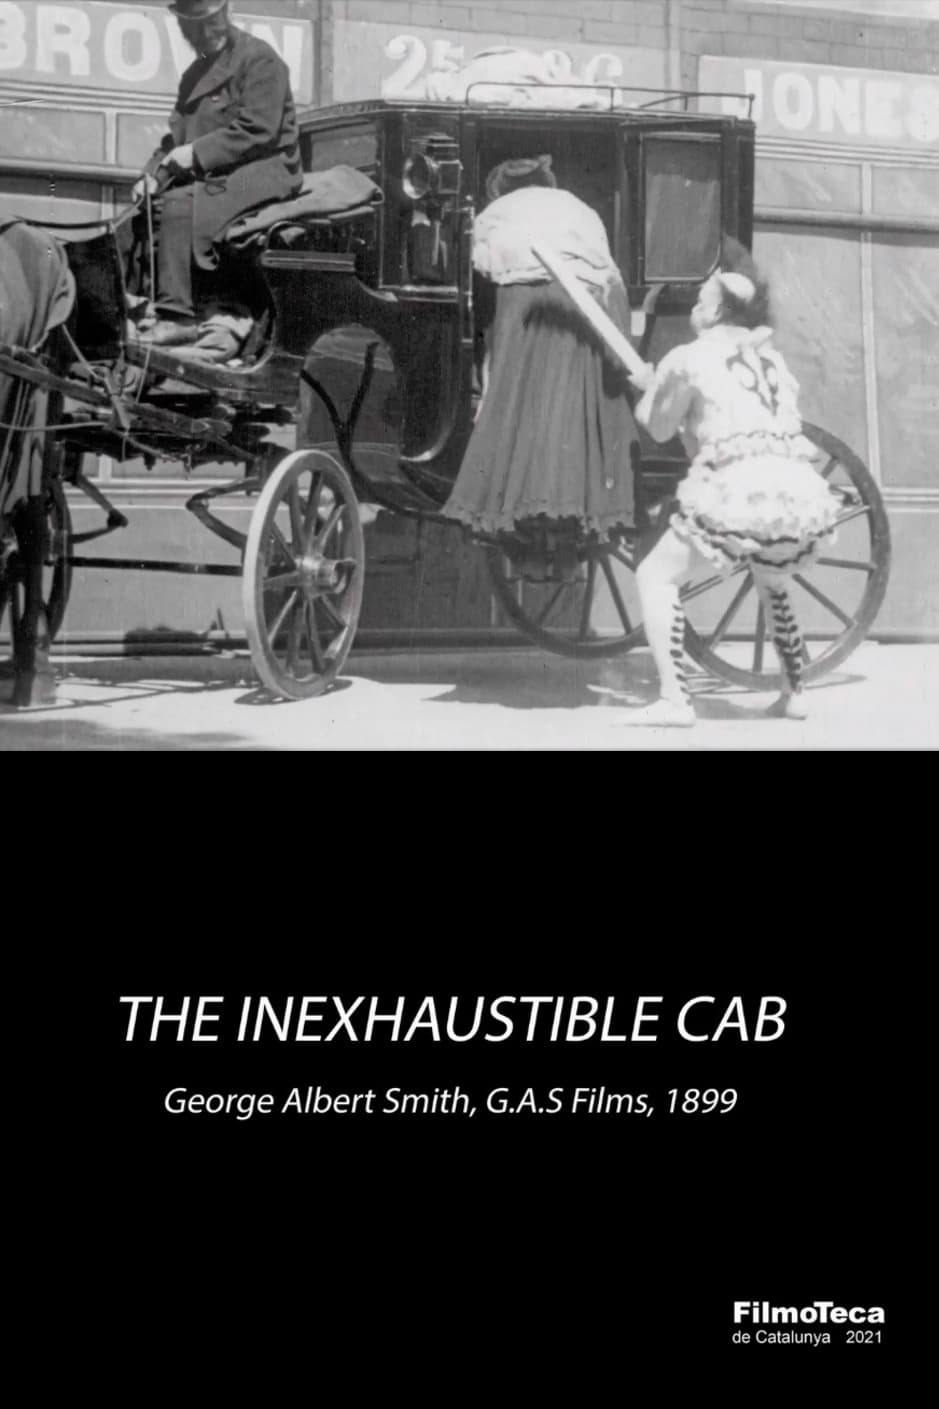 The Inexhaustible Cab